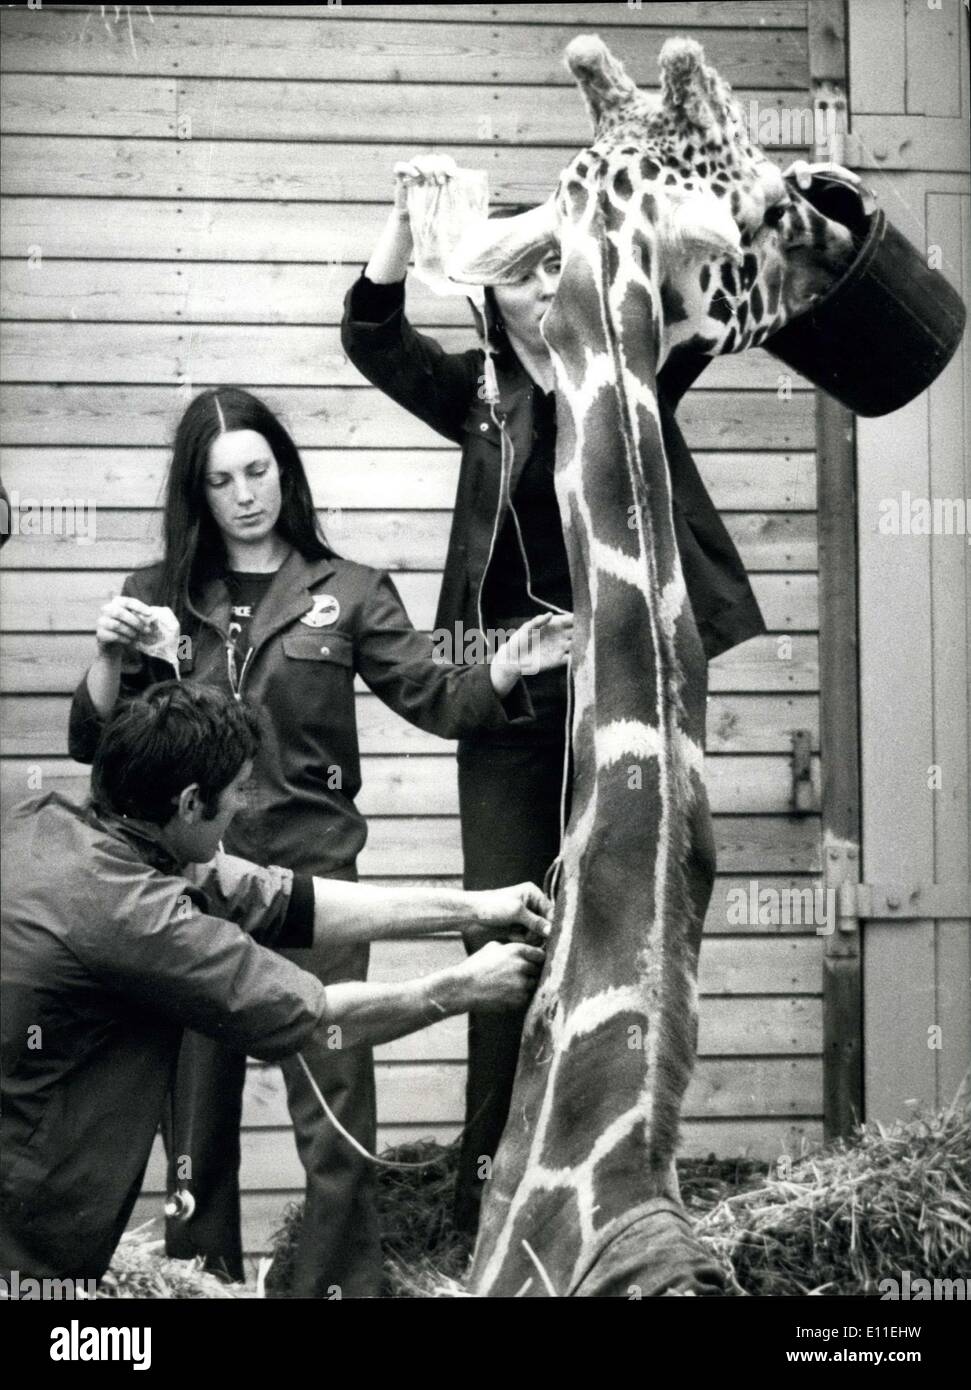 Sep. 20, 1977 - Victor the giraffe dies for love: victor, the amercus giraffe from marwell zoological park near winchester, fell in love last Thursday and couldn't get up again. He had spent the night with three lady giraffes and collapsed into the splits. firemen were called in to try to get him back on his feet but all attempts failed. He had been dosed with drugs to keep his strength up and yesterday a frame was built around him for a desperate attempt to hoist him up Stock Photo